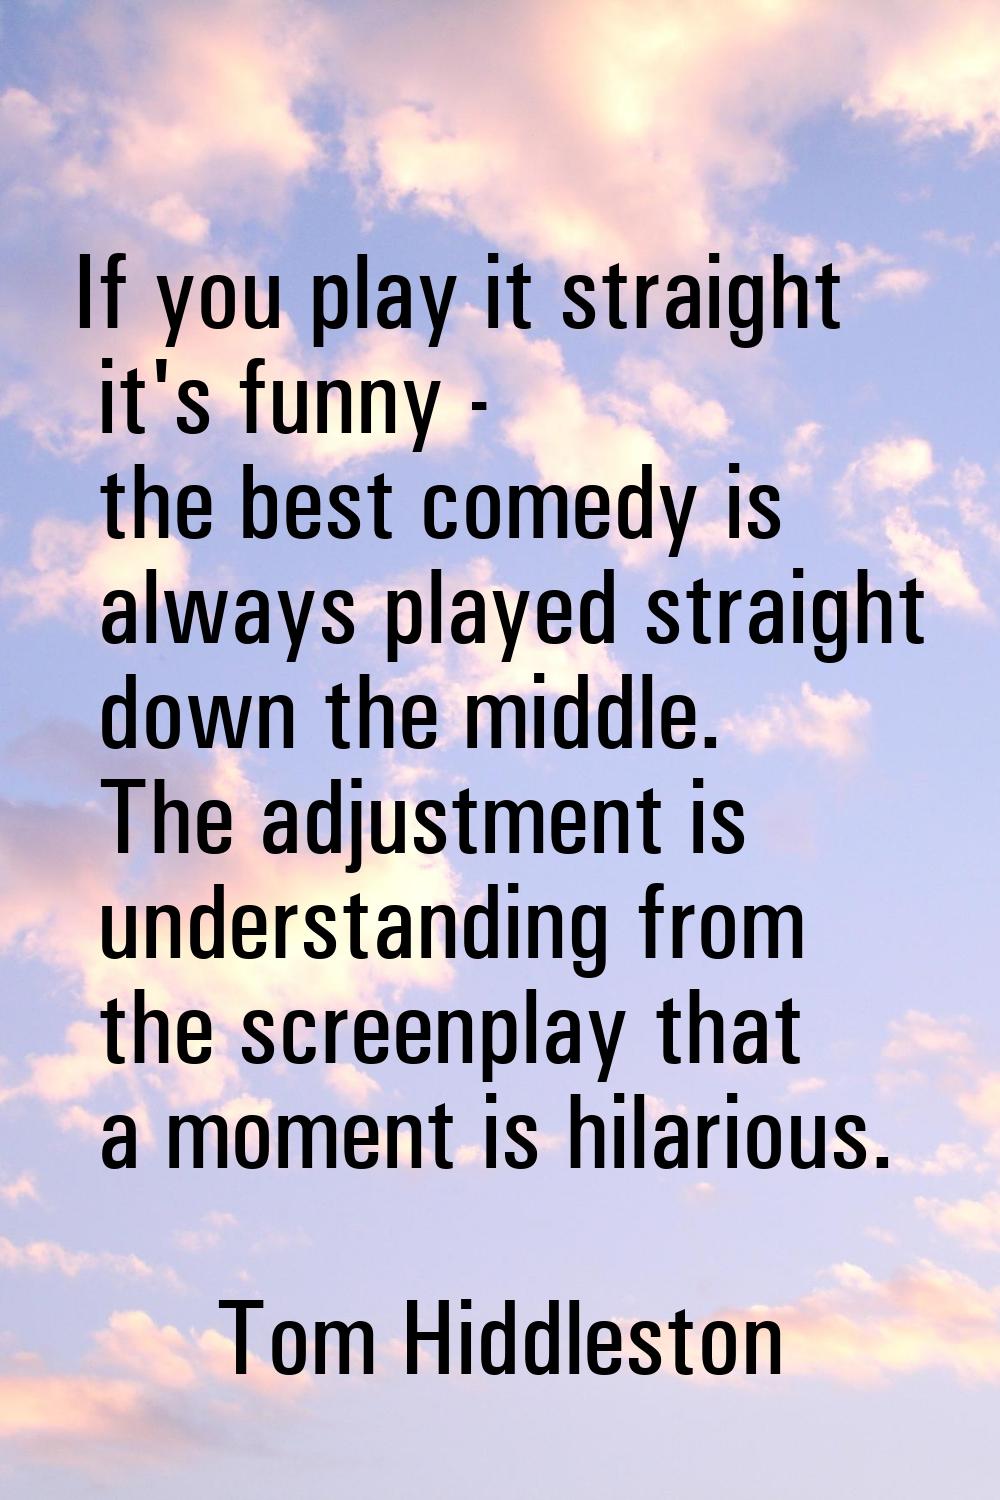 If you play it straight it's funny - the best comedy is always played straight down the middle. The